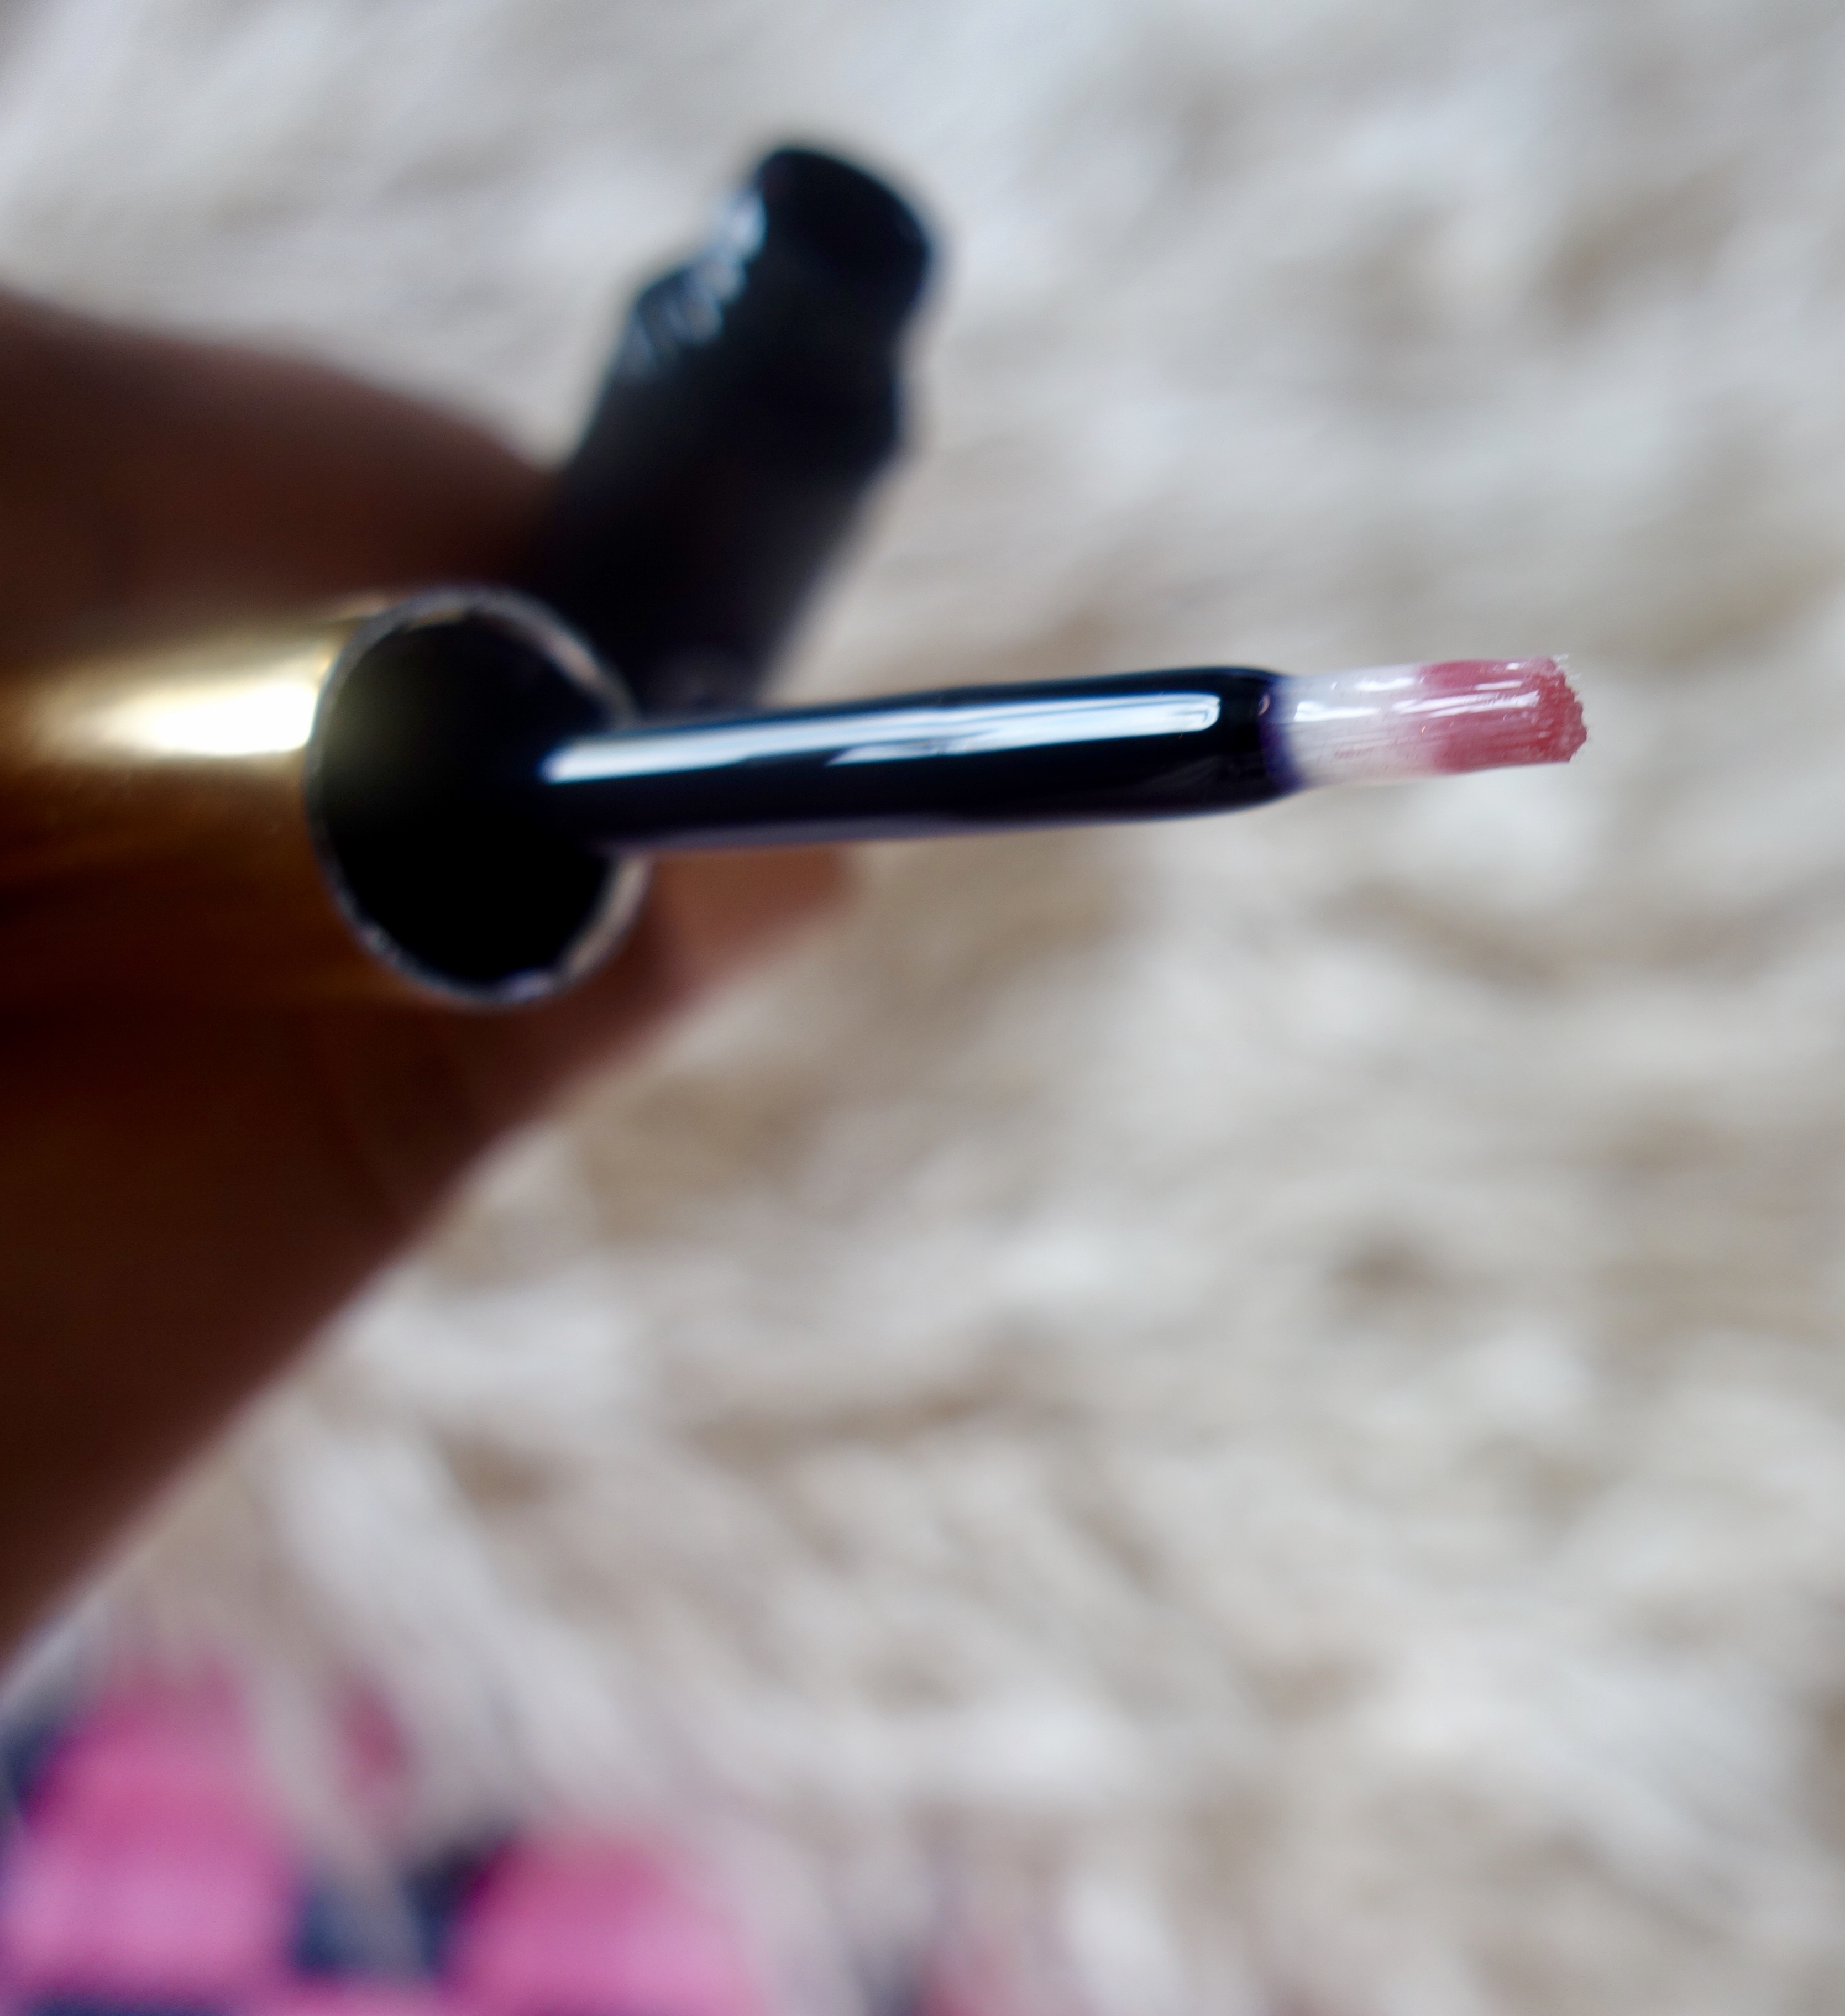 Review: Chanel Rouge Double Intensité Ultra Wear Lip Colour In Soft Rose  (48) – Daff Diaries